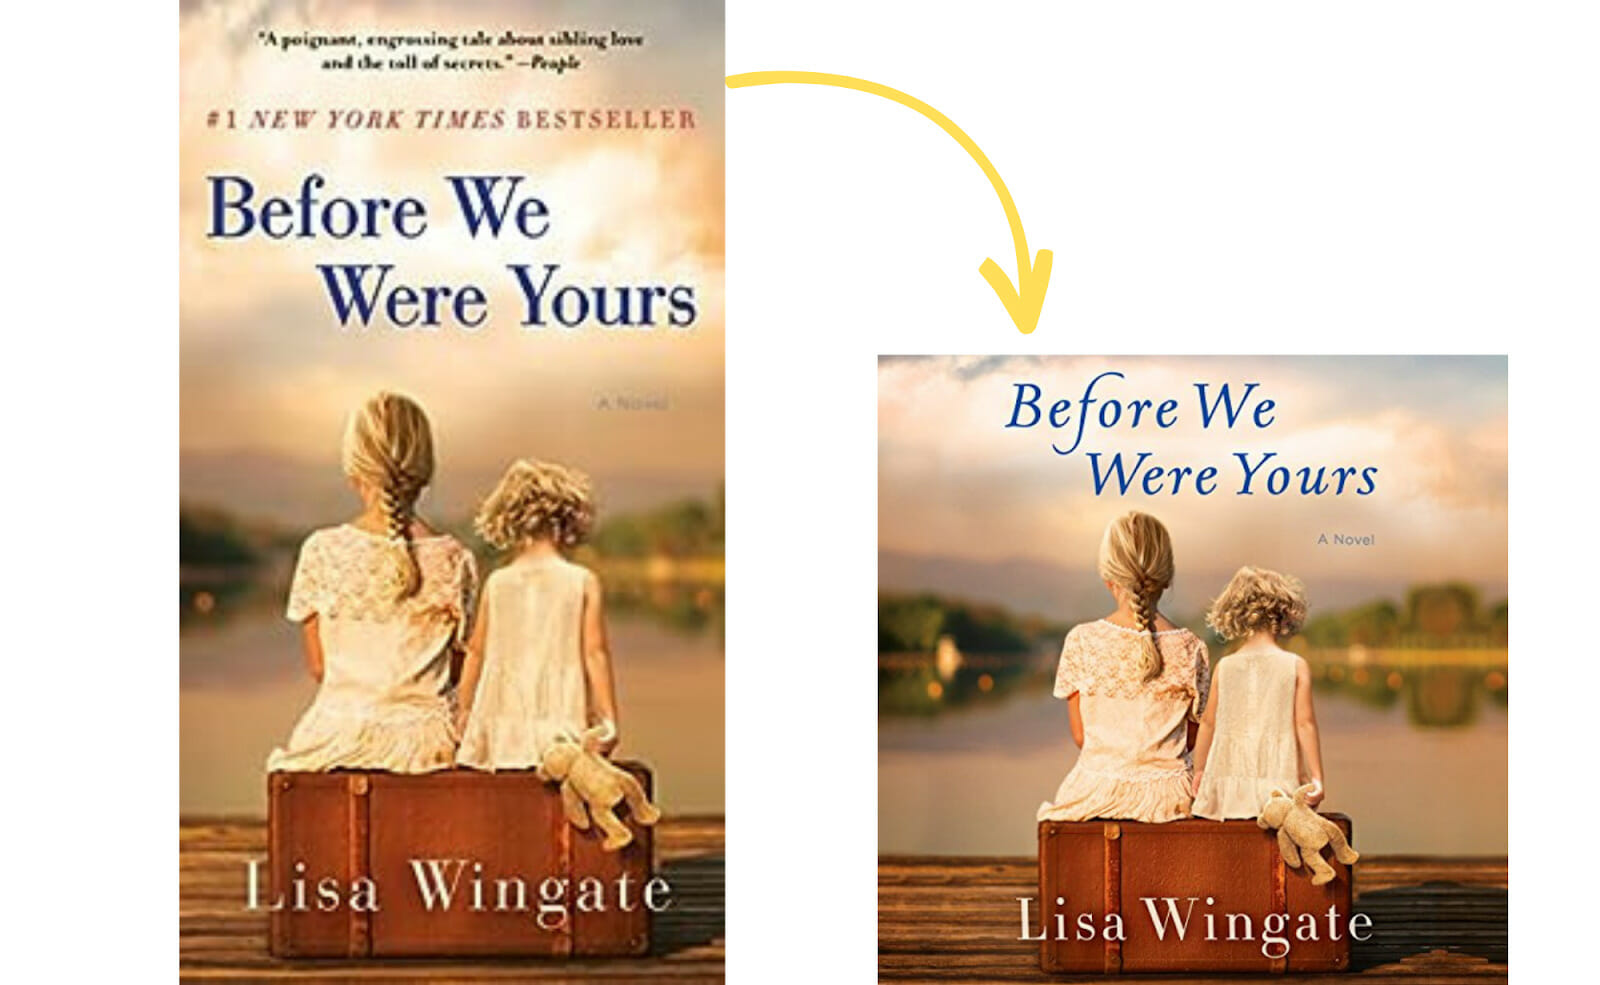 Designing audiobook covers featuring Before We Were Yours by Lisa Wingate